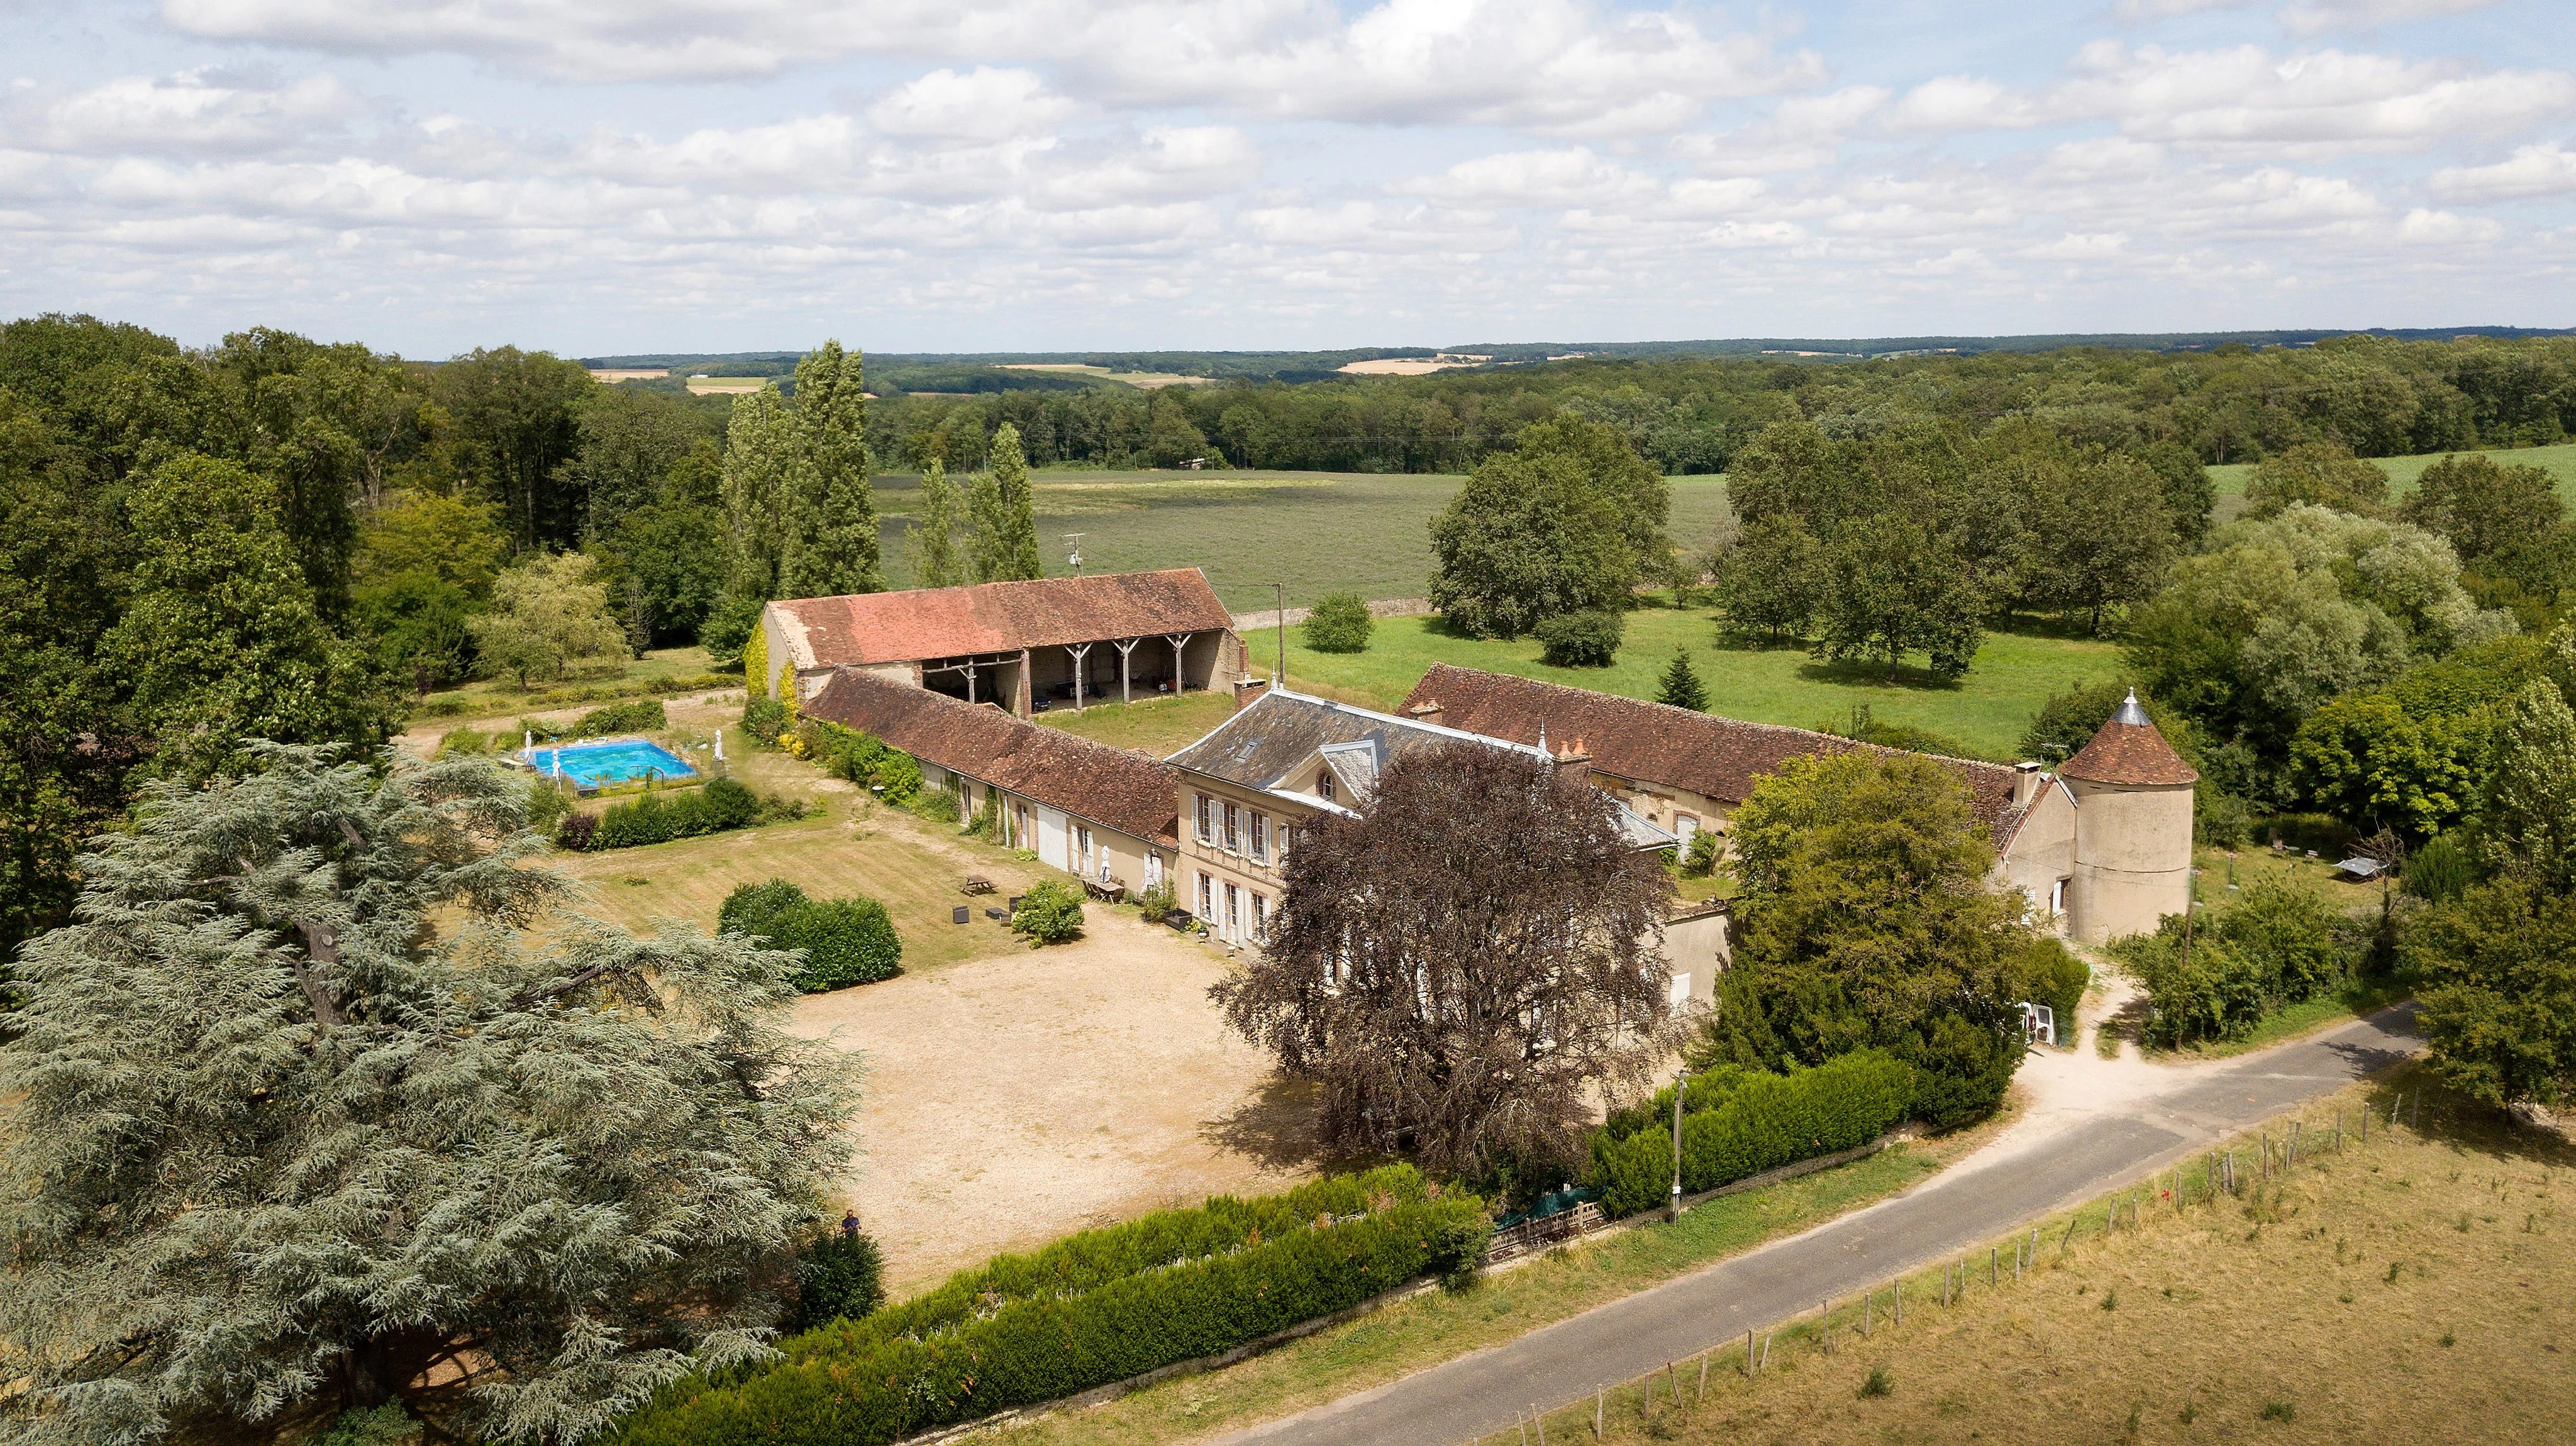 Burgundy – An elegant 18th/19th century property in 2.4 hectares